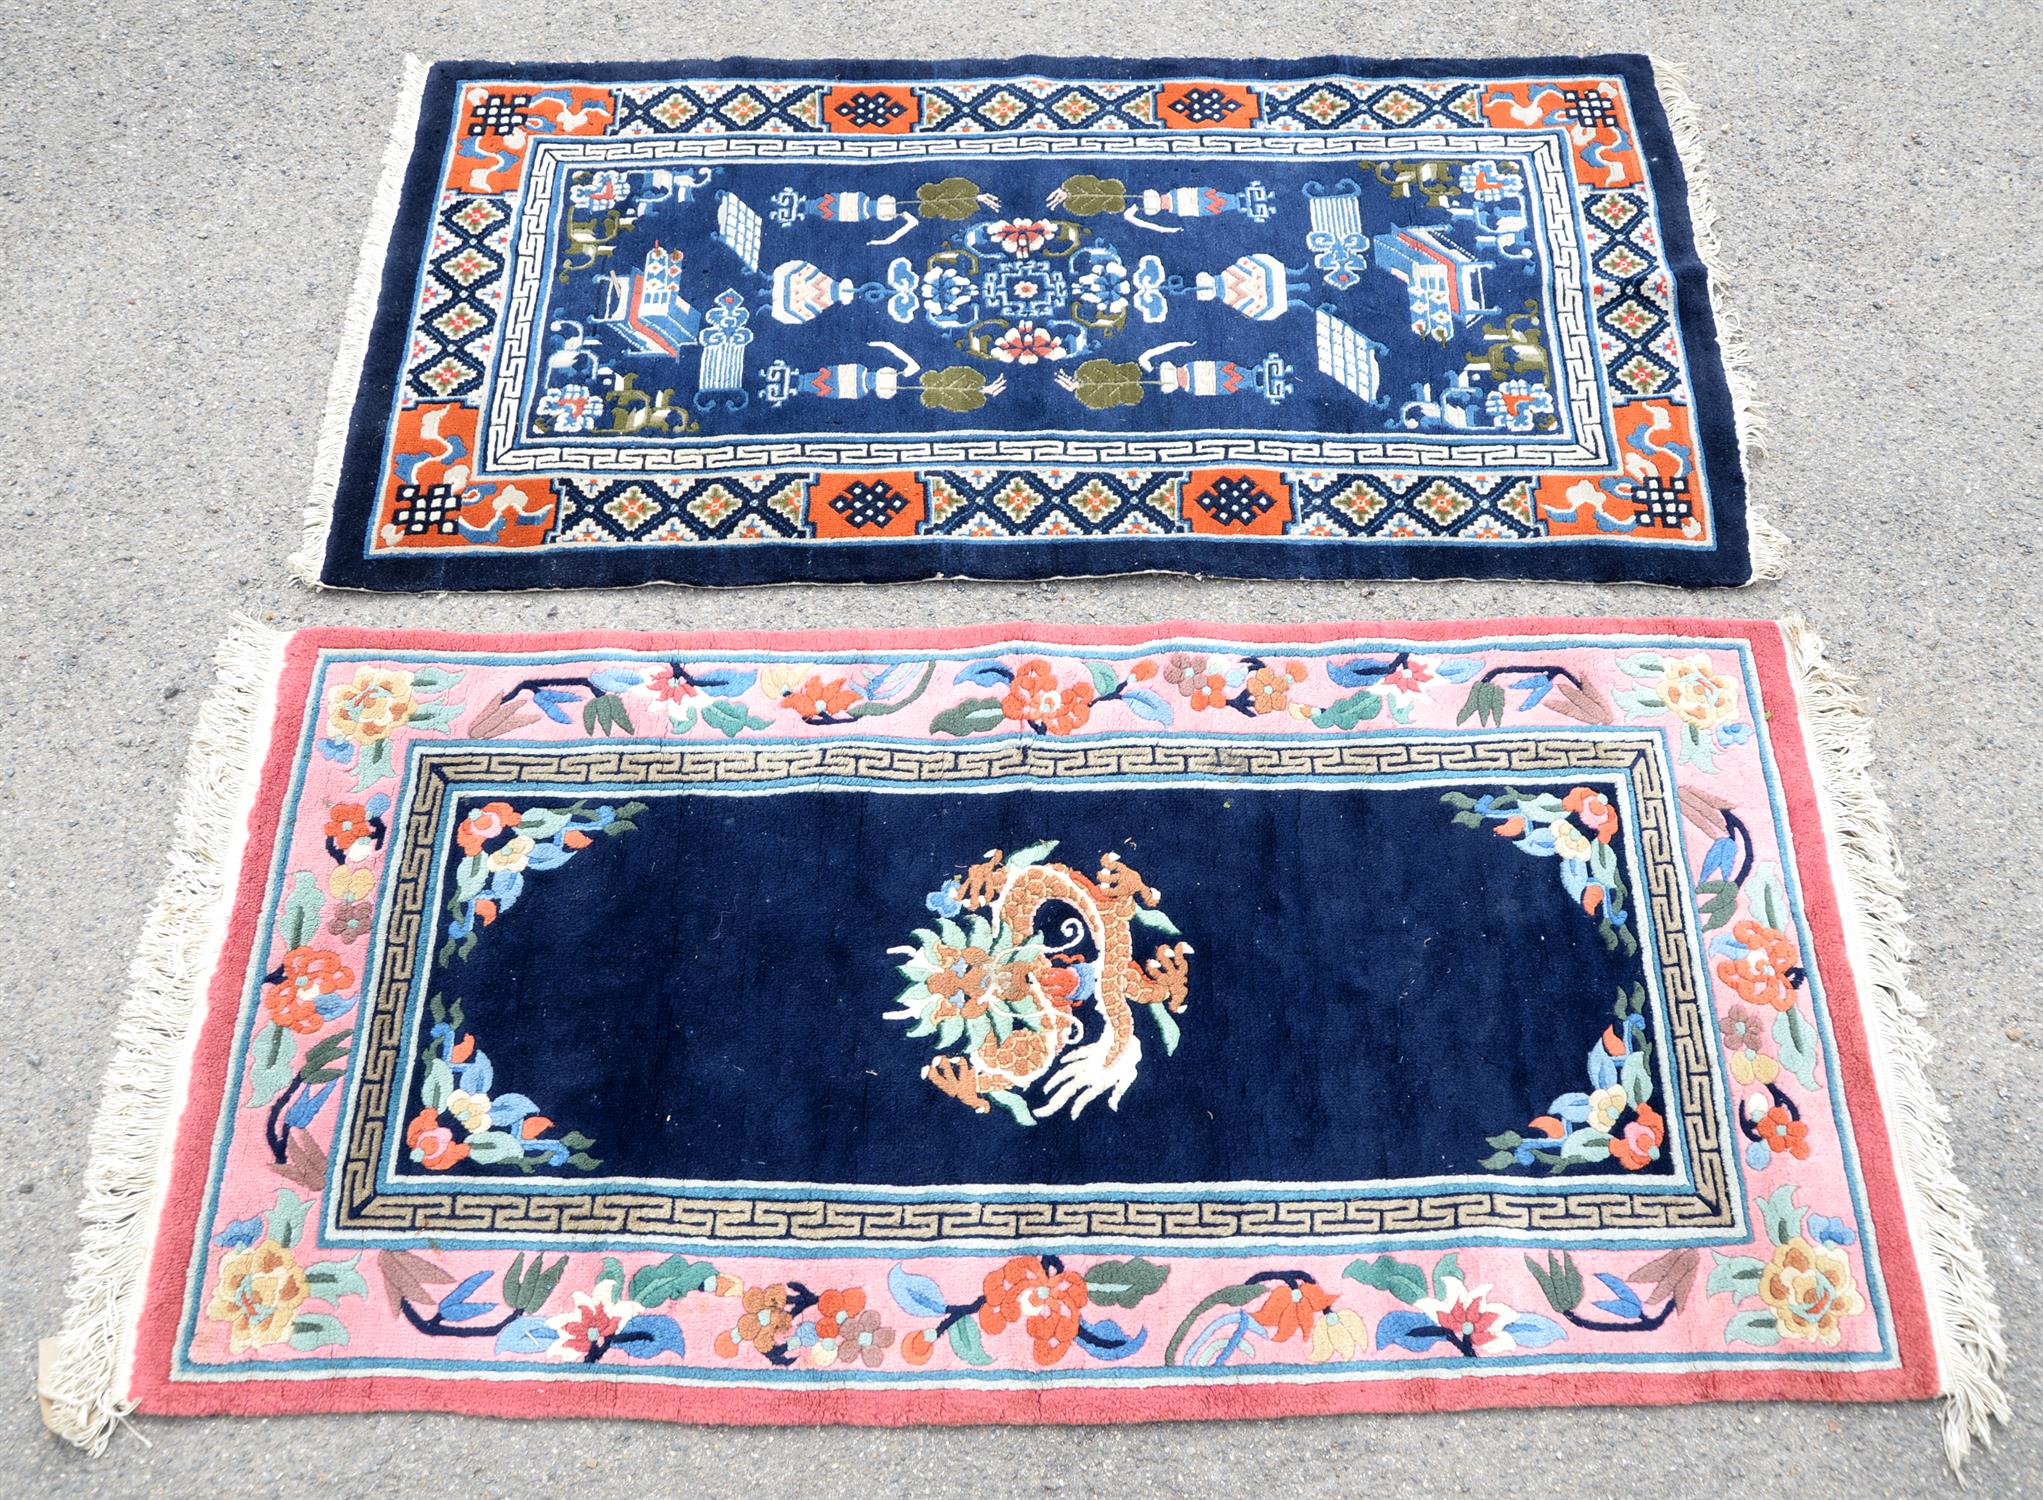 Chinese blue ground rug, central floral medallions and vases and furniture within a Greek key